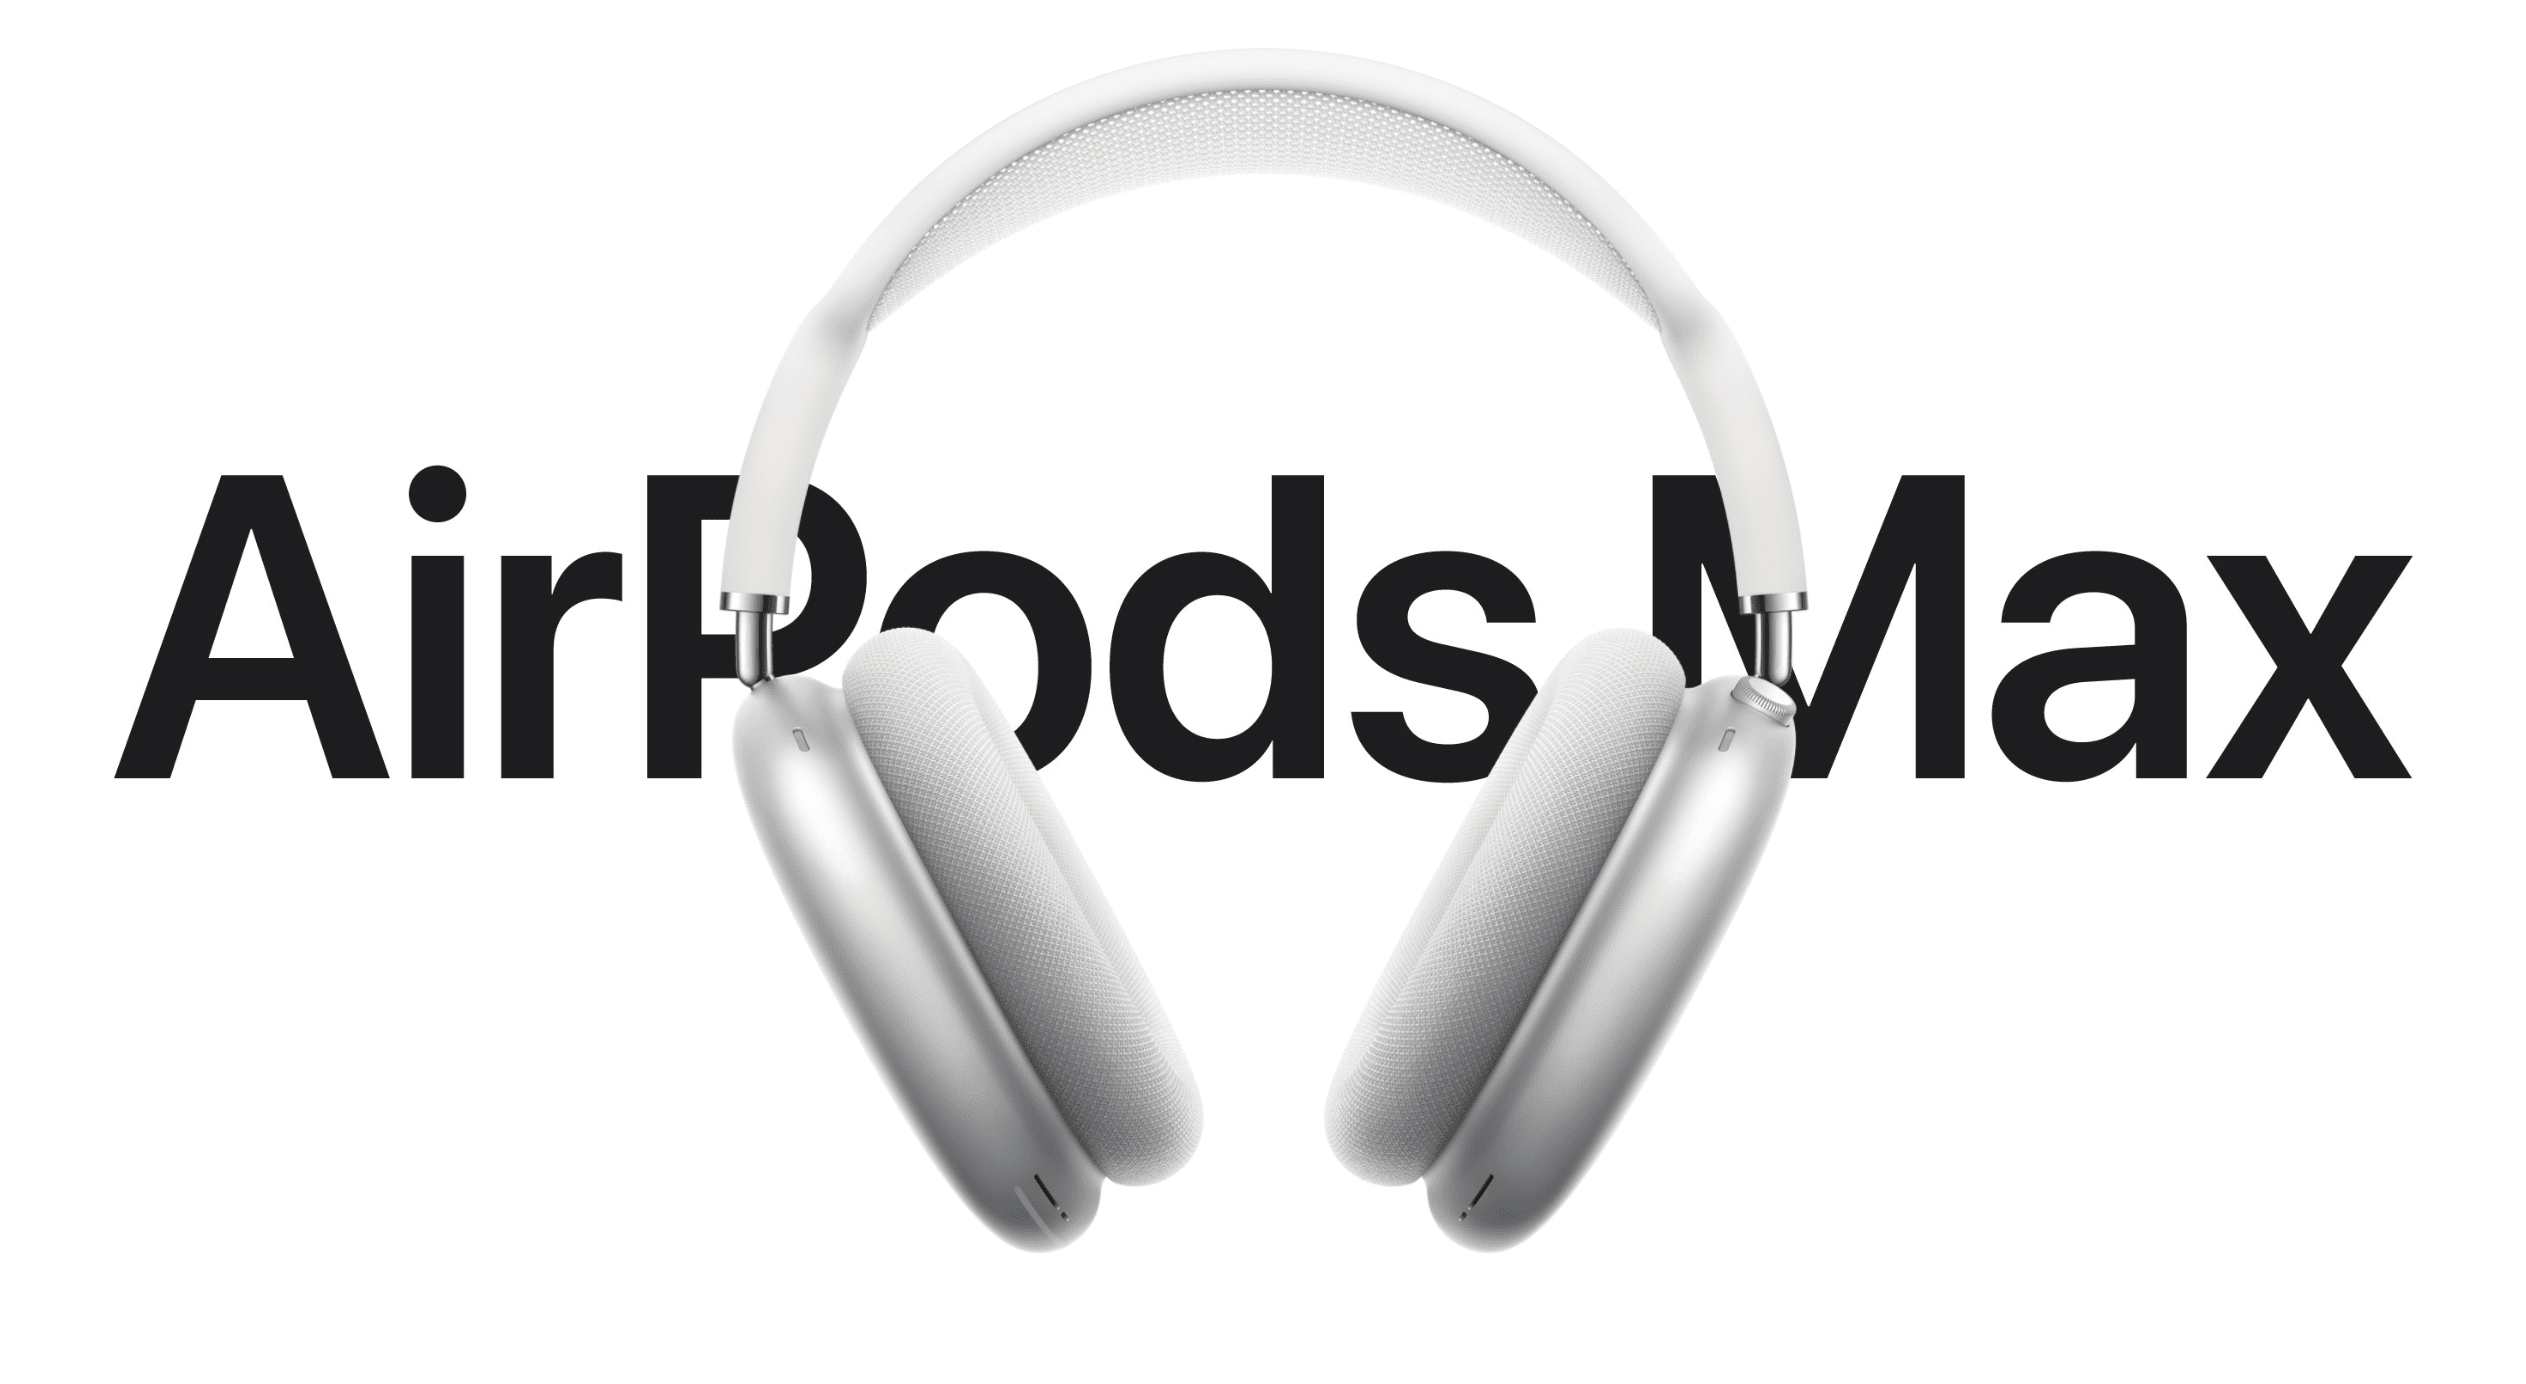 I Spent $150 On Knock-Off AirPods Max's - Was It Worth It? 